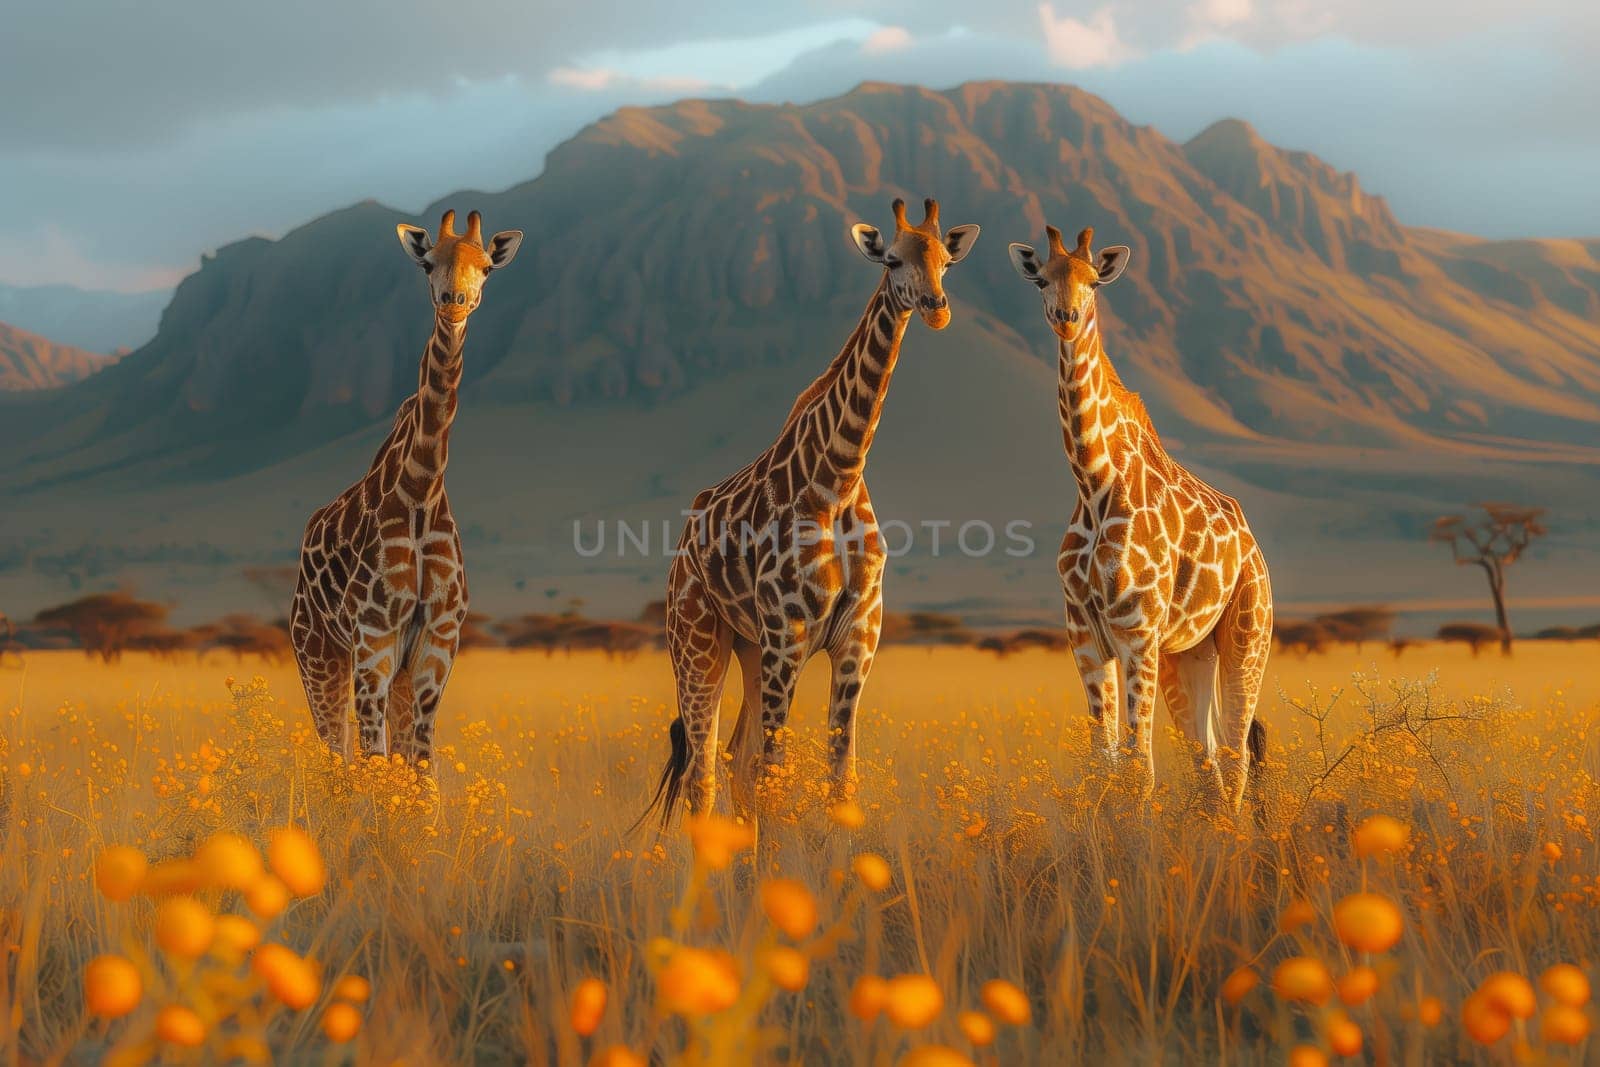 Three Giraffidae amidst flowers, with mountains and sky in background by richwolf